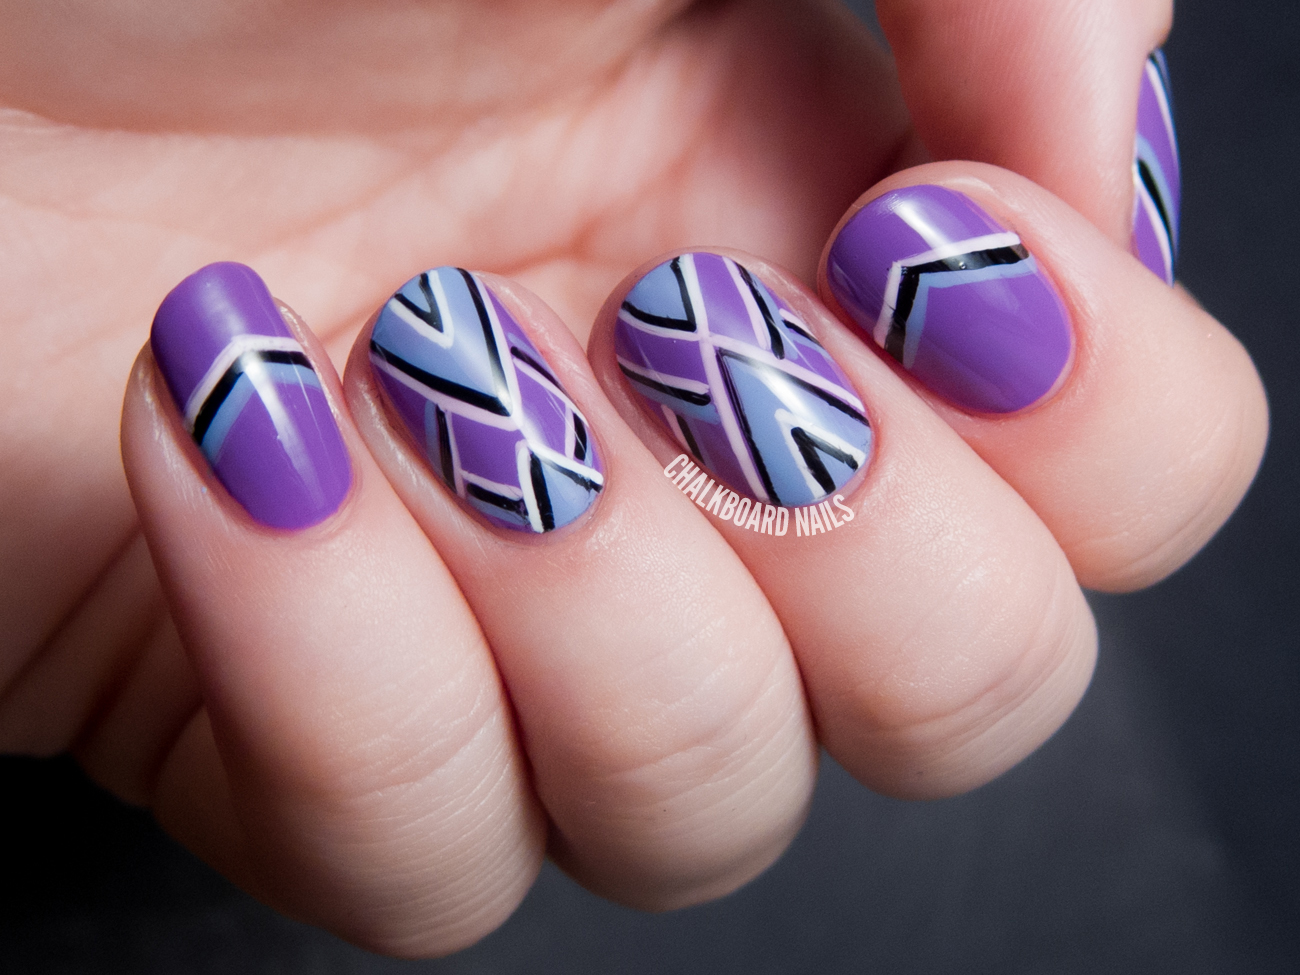 4. The Best Nail Polishes for Creating Chevron Lines - wide 6